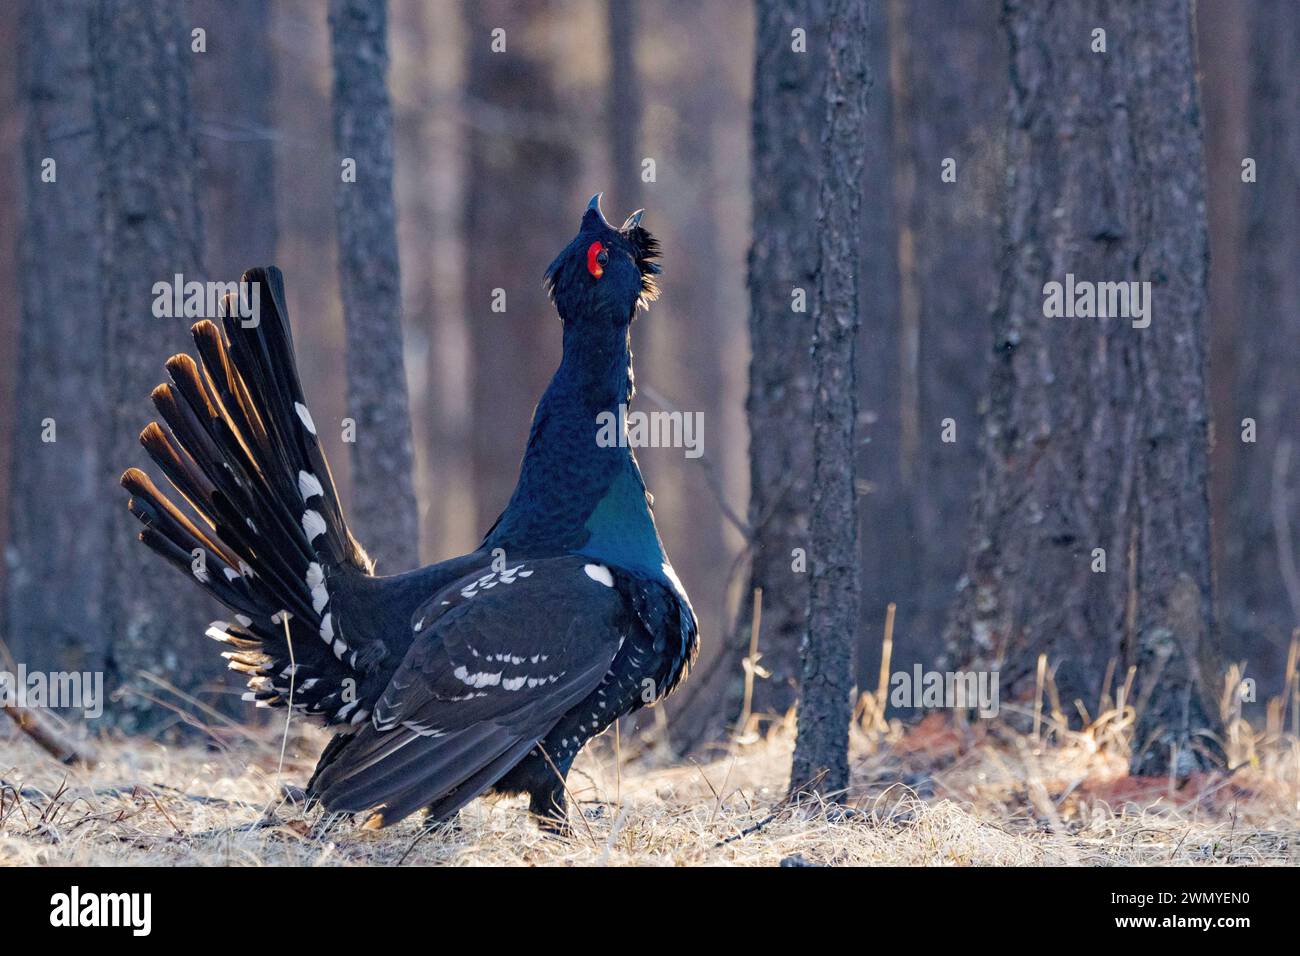 Mongolia, Tôv Province, Mongonmorit District, Dahurian Larch forest (Larix dahurica), Black-billed Capercaillie (Tetrao urogalloides formerly Tetrao parvirostris), in courtship display, on the ground Stock Photo